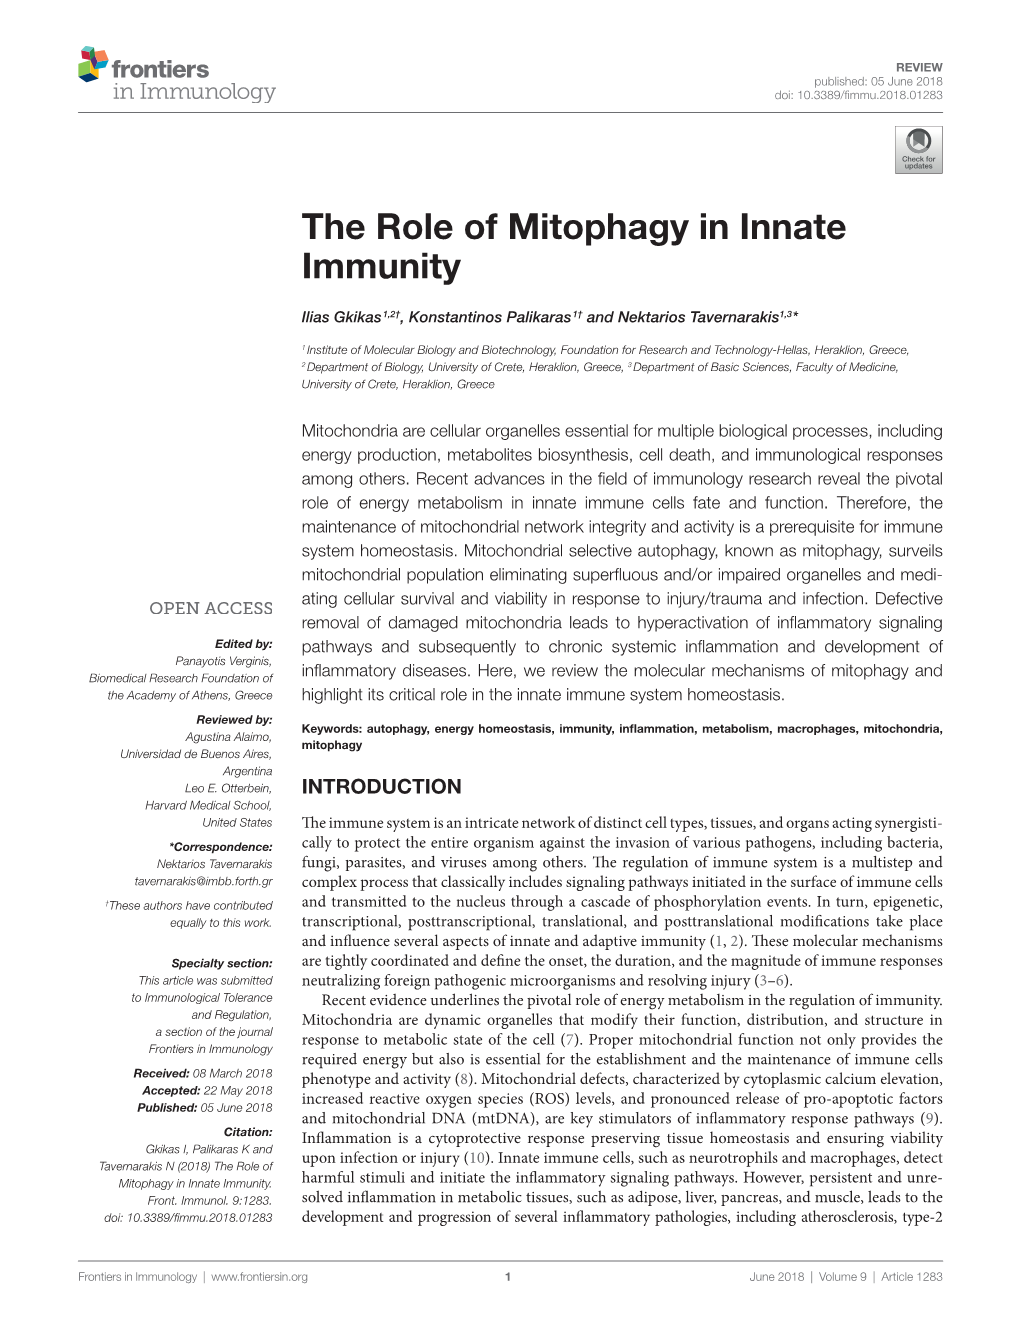 The Role of Mitophagy in Innate Immunity